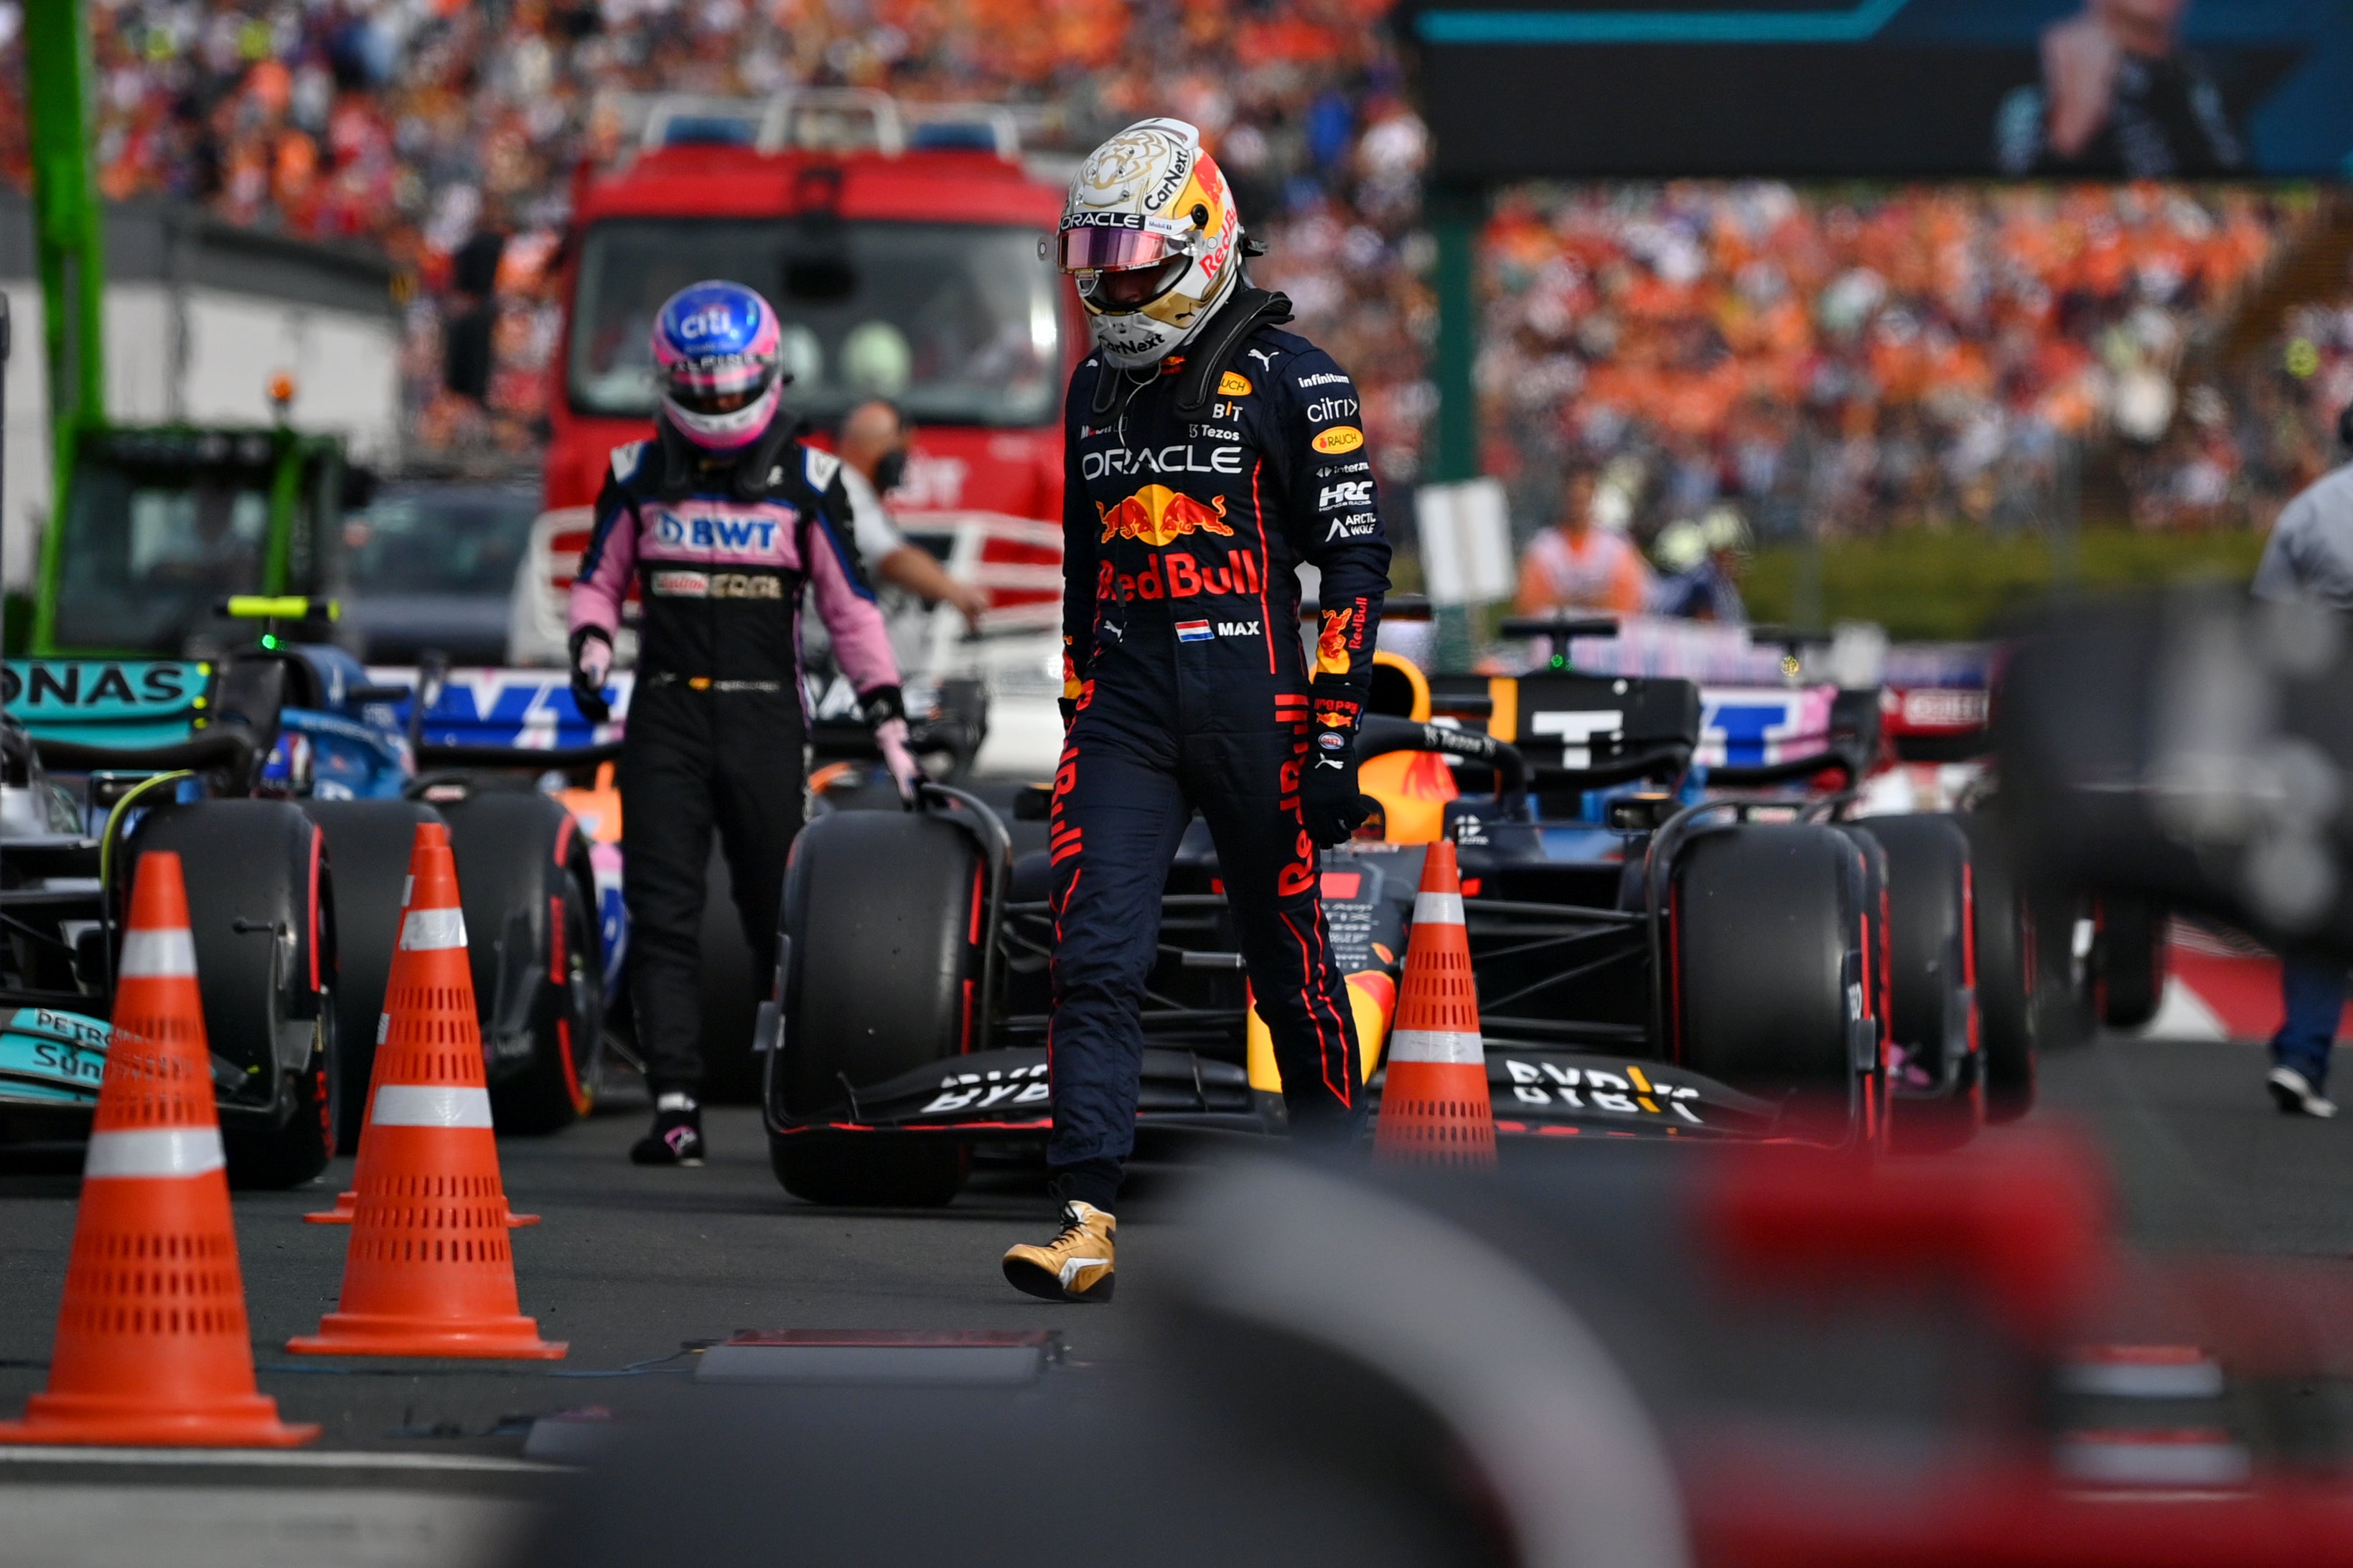 It was a nightmare qualifying for Max Verstappen – he starts Sunday’s race in 10th